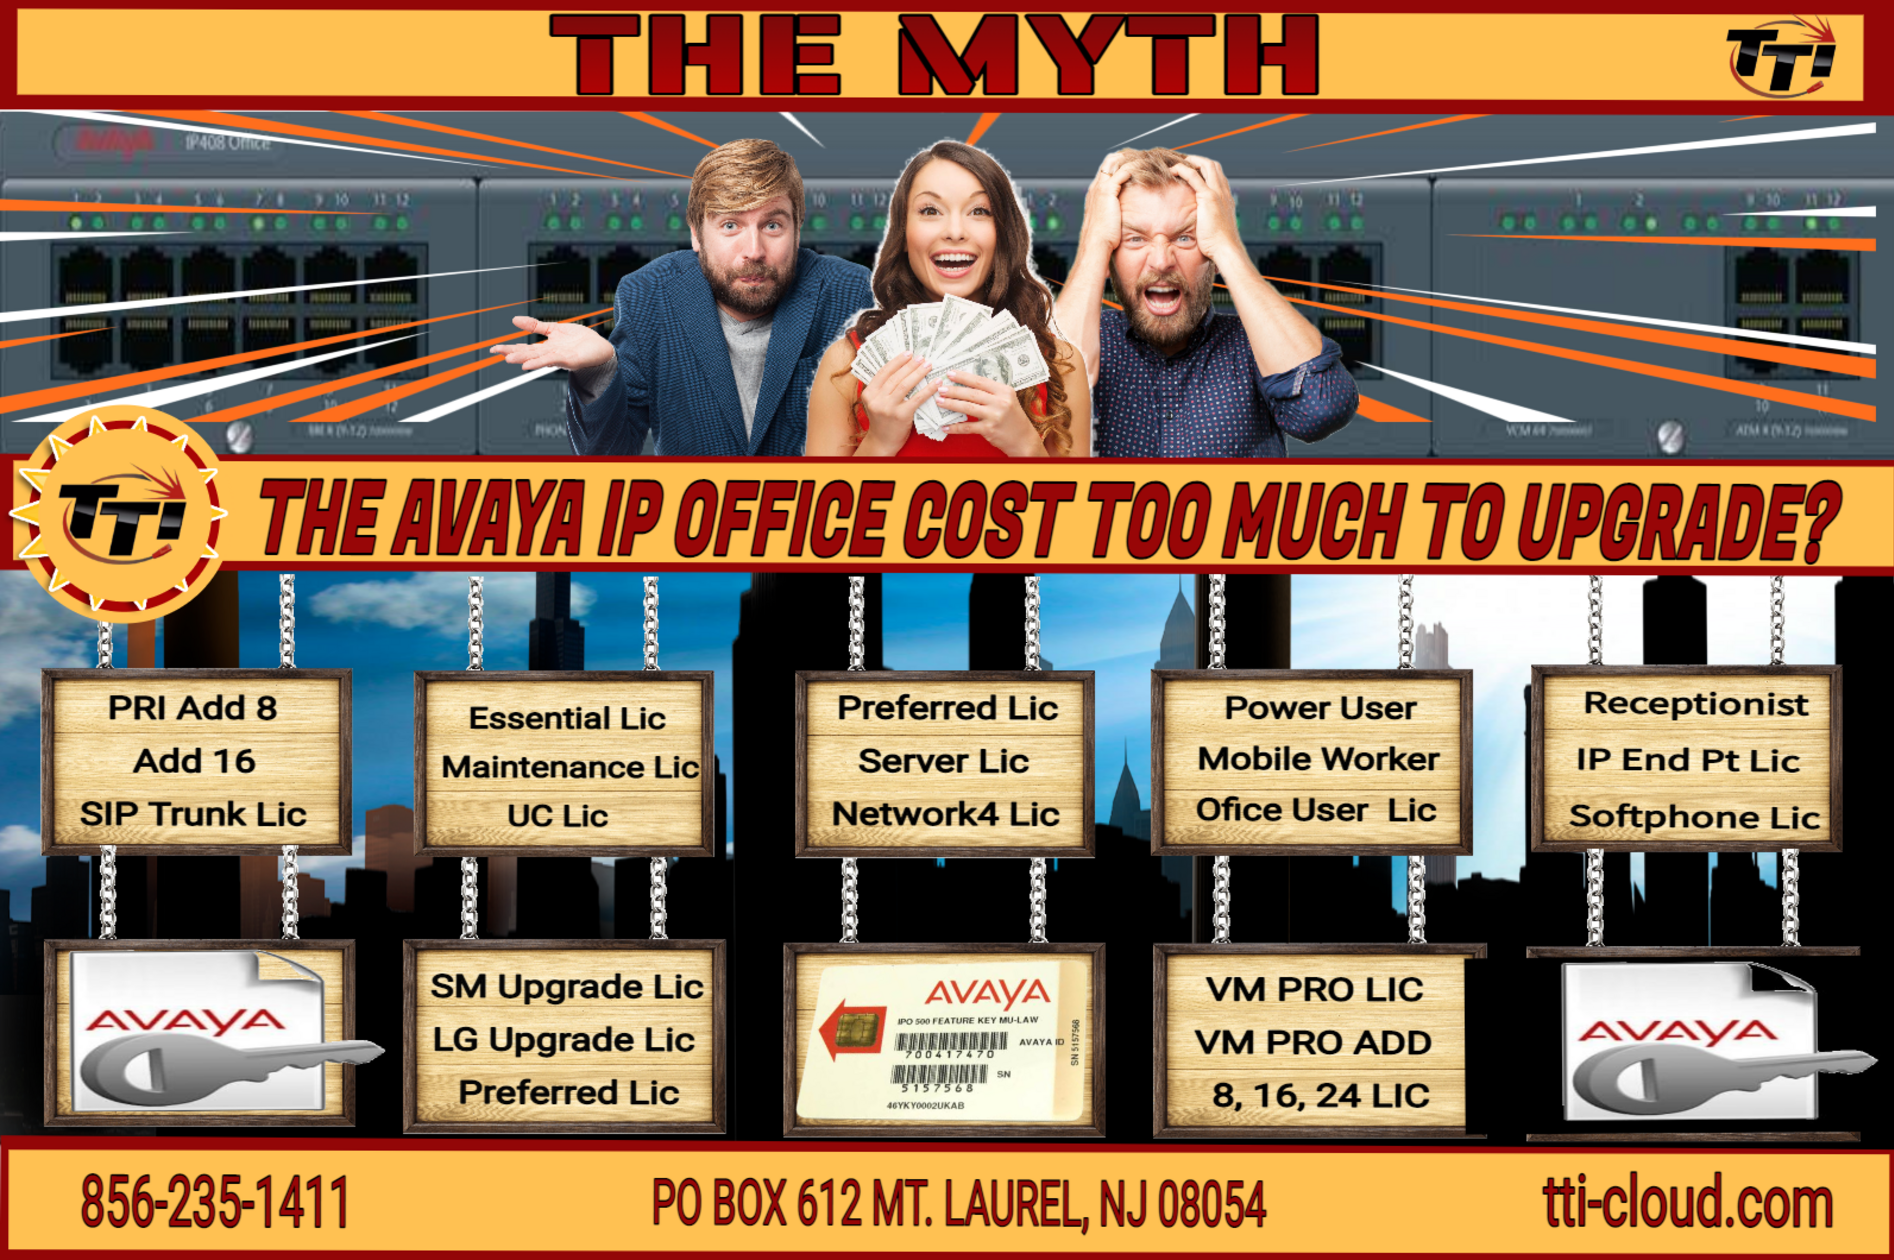 Myth Busters, IP Office cost too much upgrade